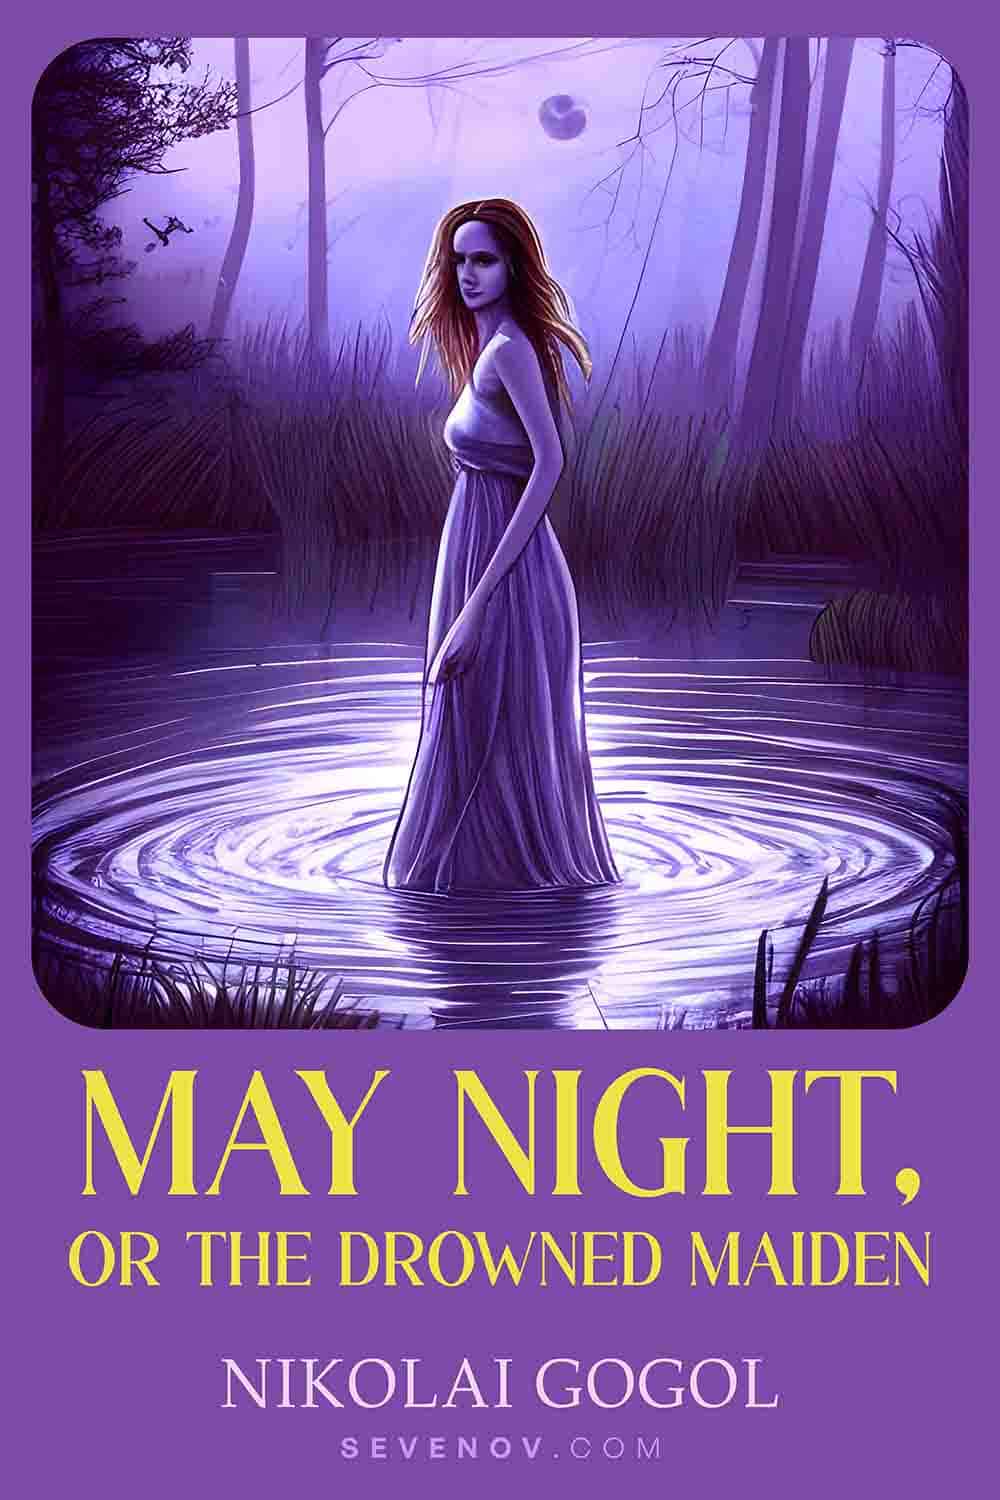 https://pagevio.com/wp-content/uploads/2023/02/may-night-or-the-drowned-maiden-20230213.jpg